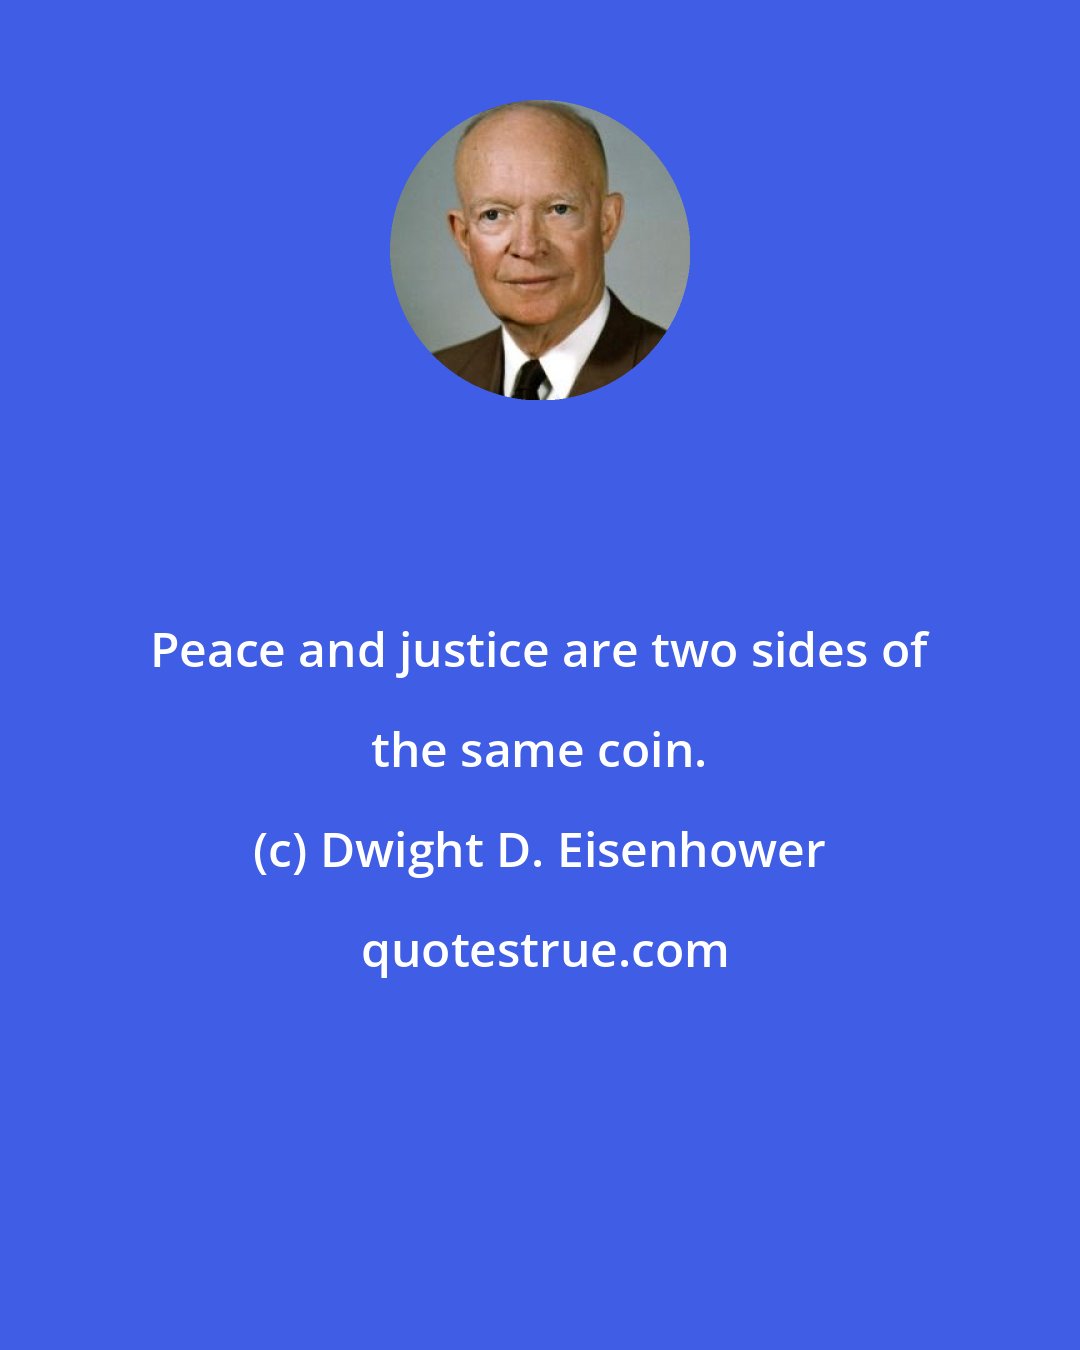 Dwight D. Eisenhower: Peace and justice are two sides of the same coin.